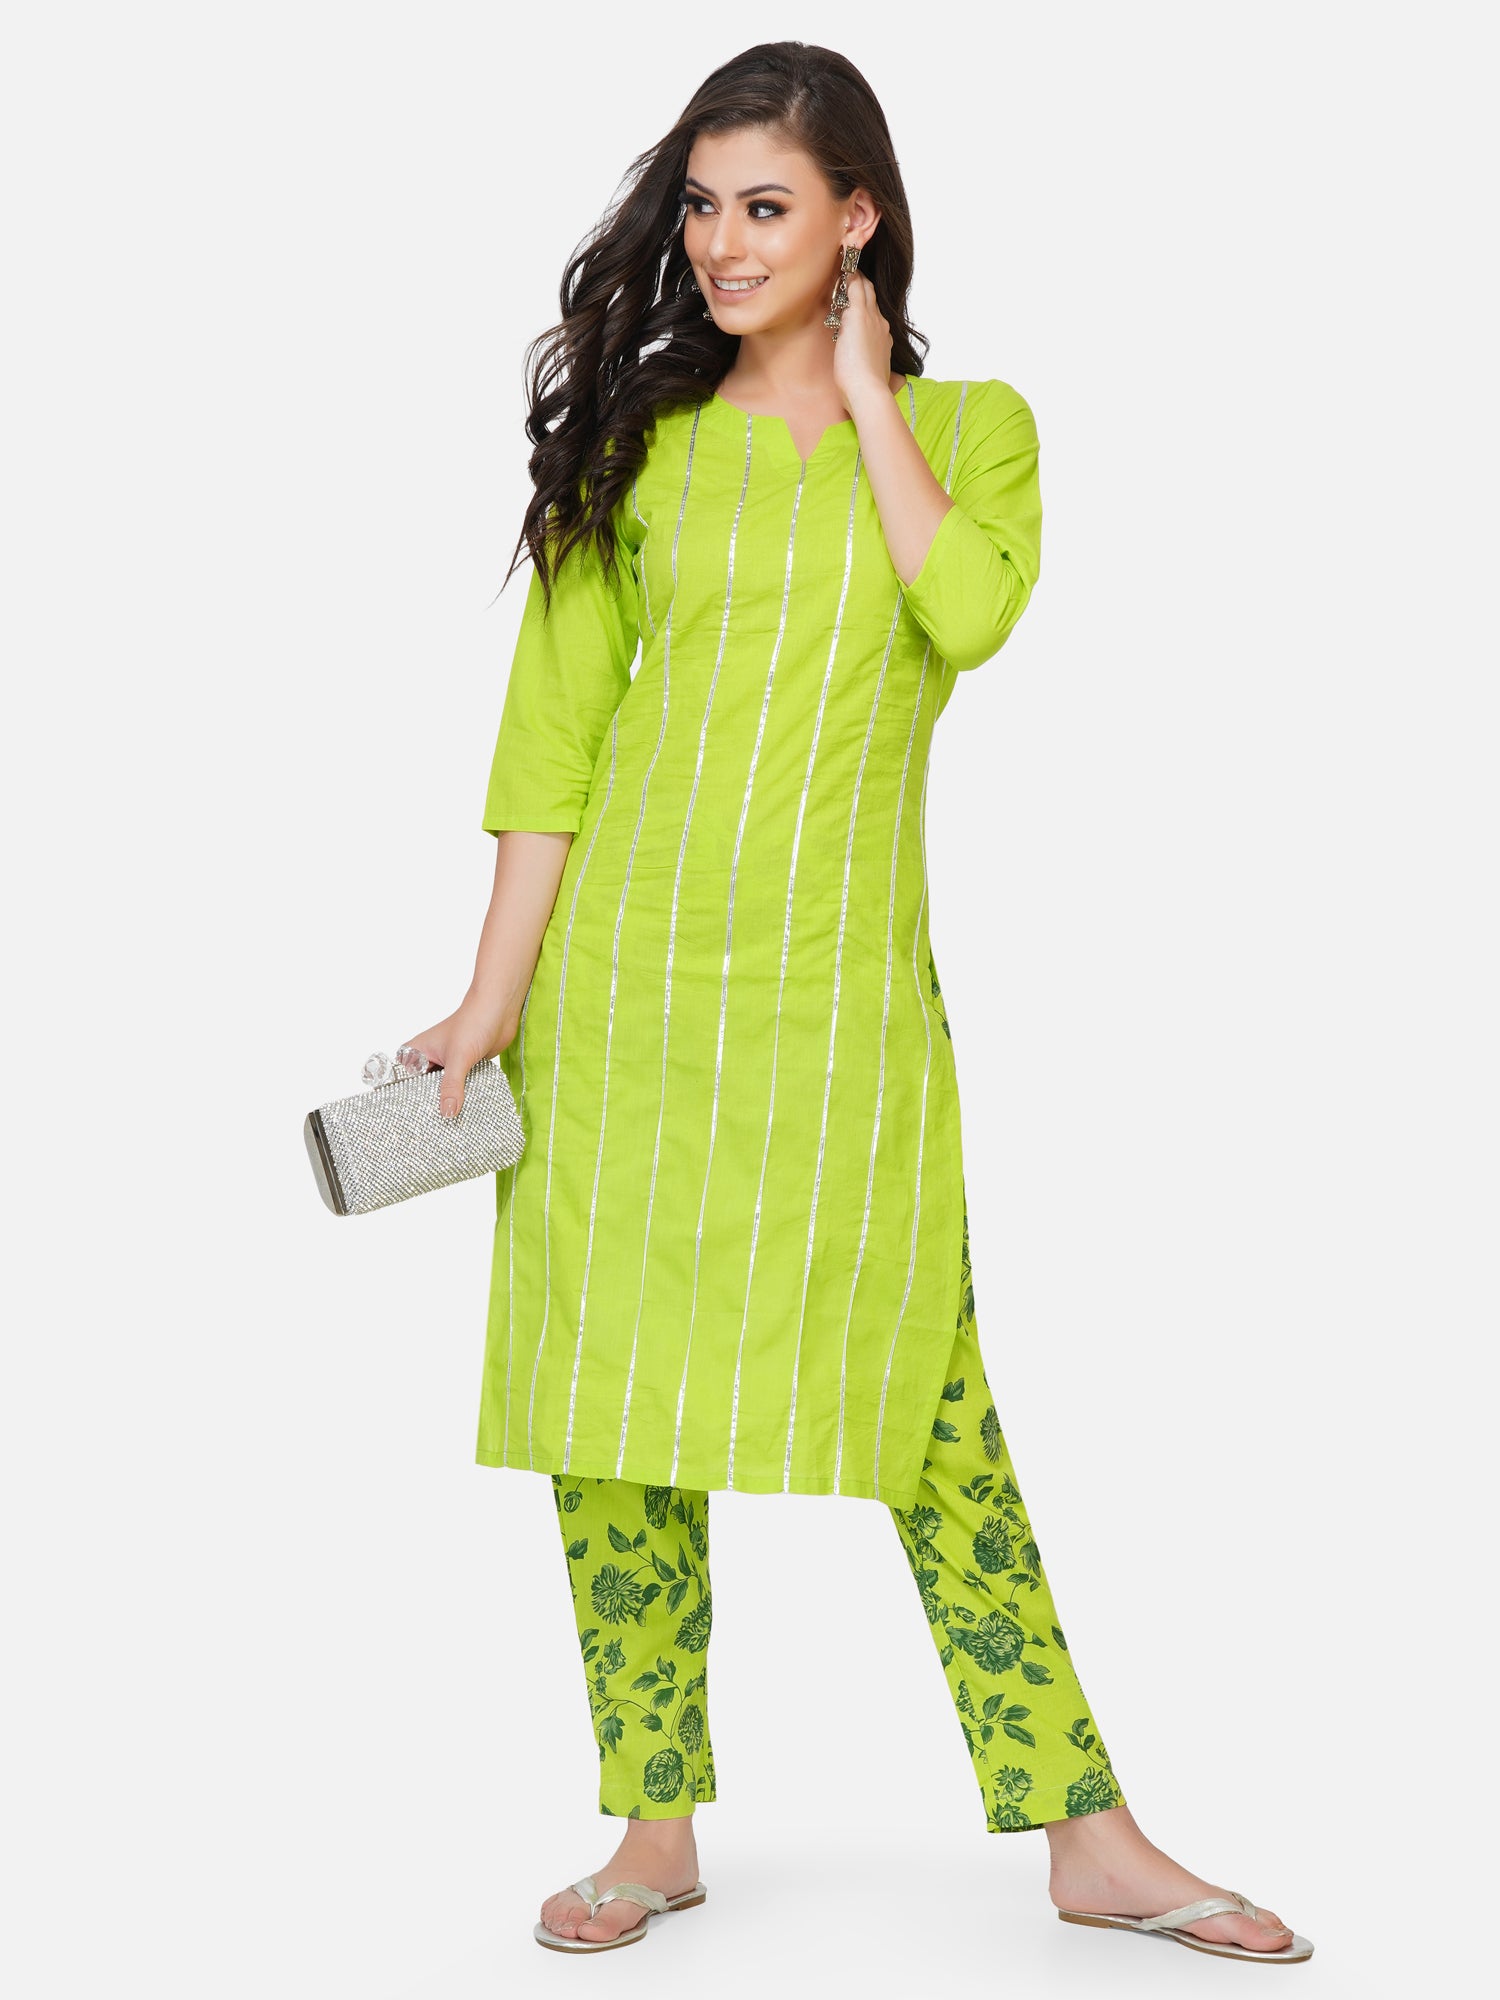 Buy Ramesh Vastra Bhandar Green Kurti And Blue,Orange Color Kurti With Red  And Black Cotton Lycra leggings Combo Set at Amazon.in